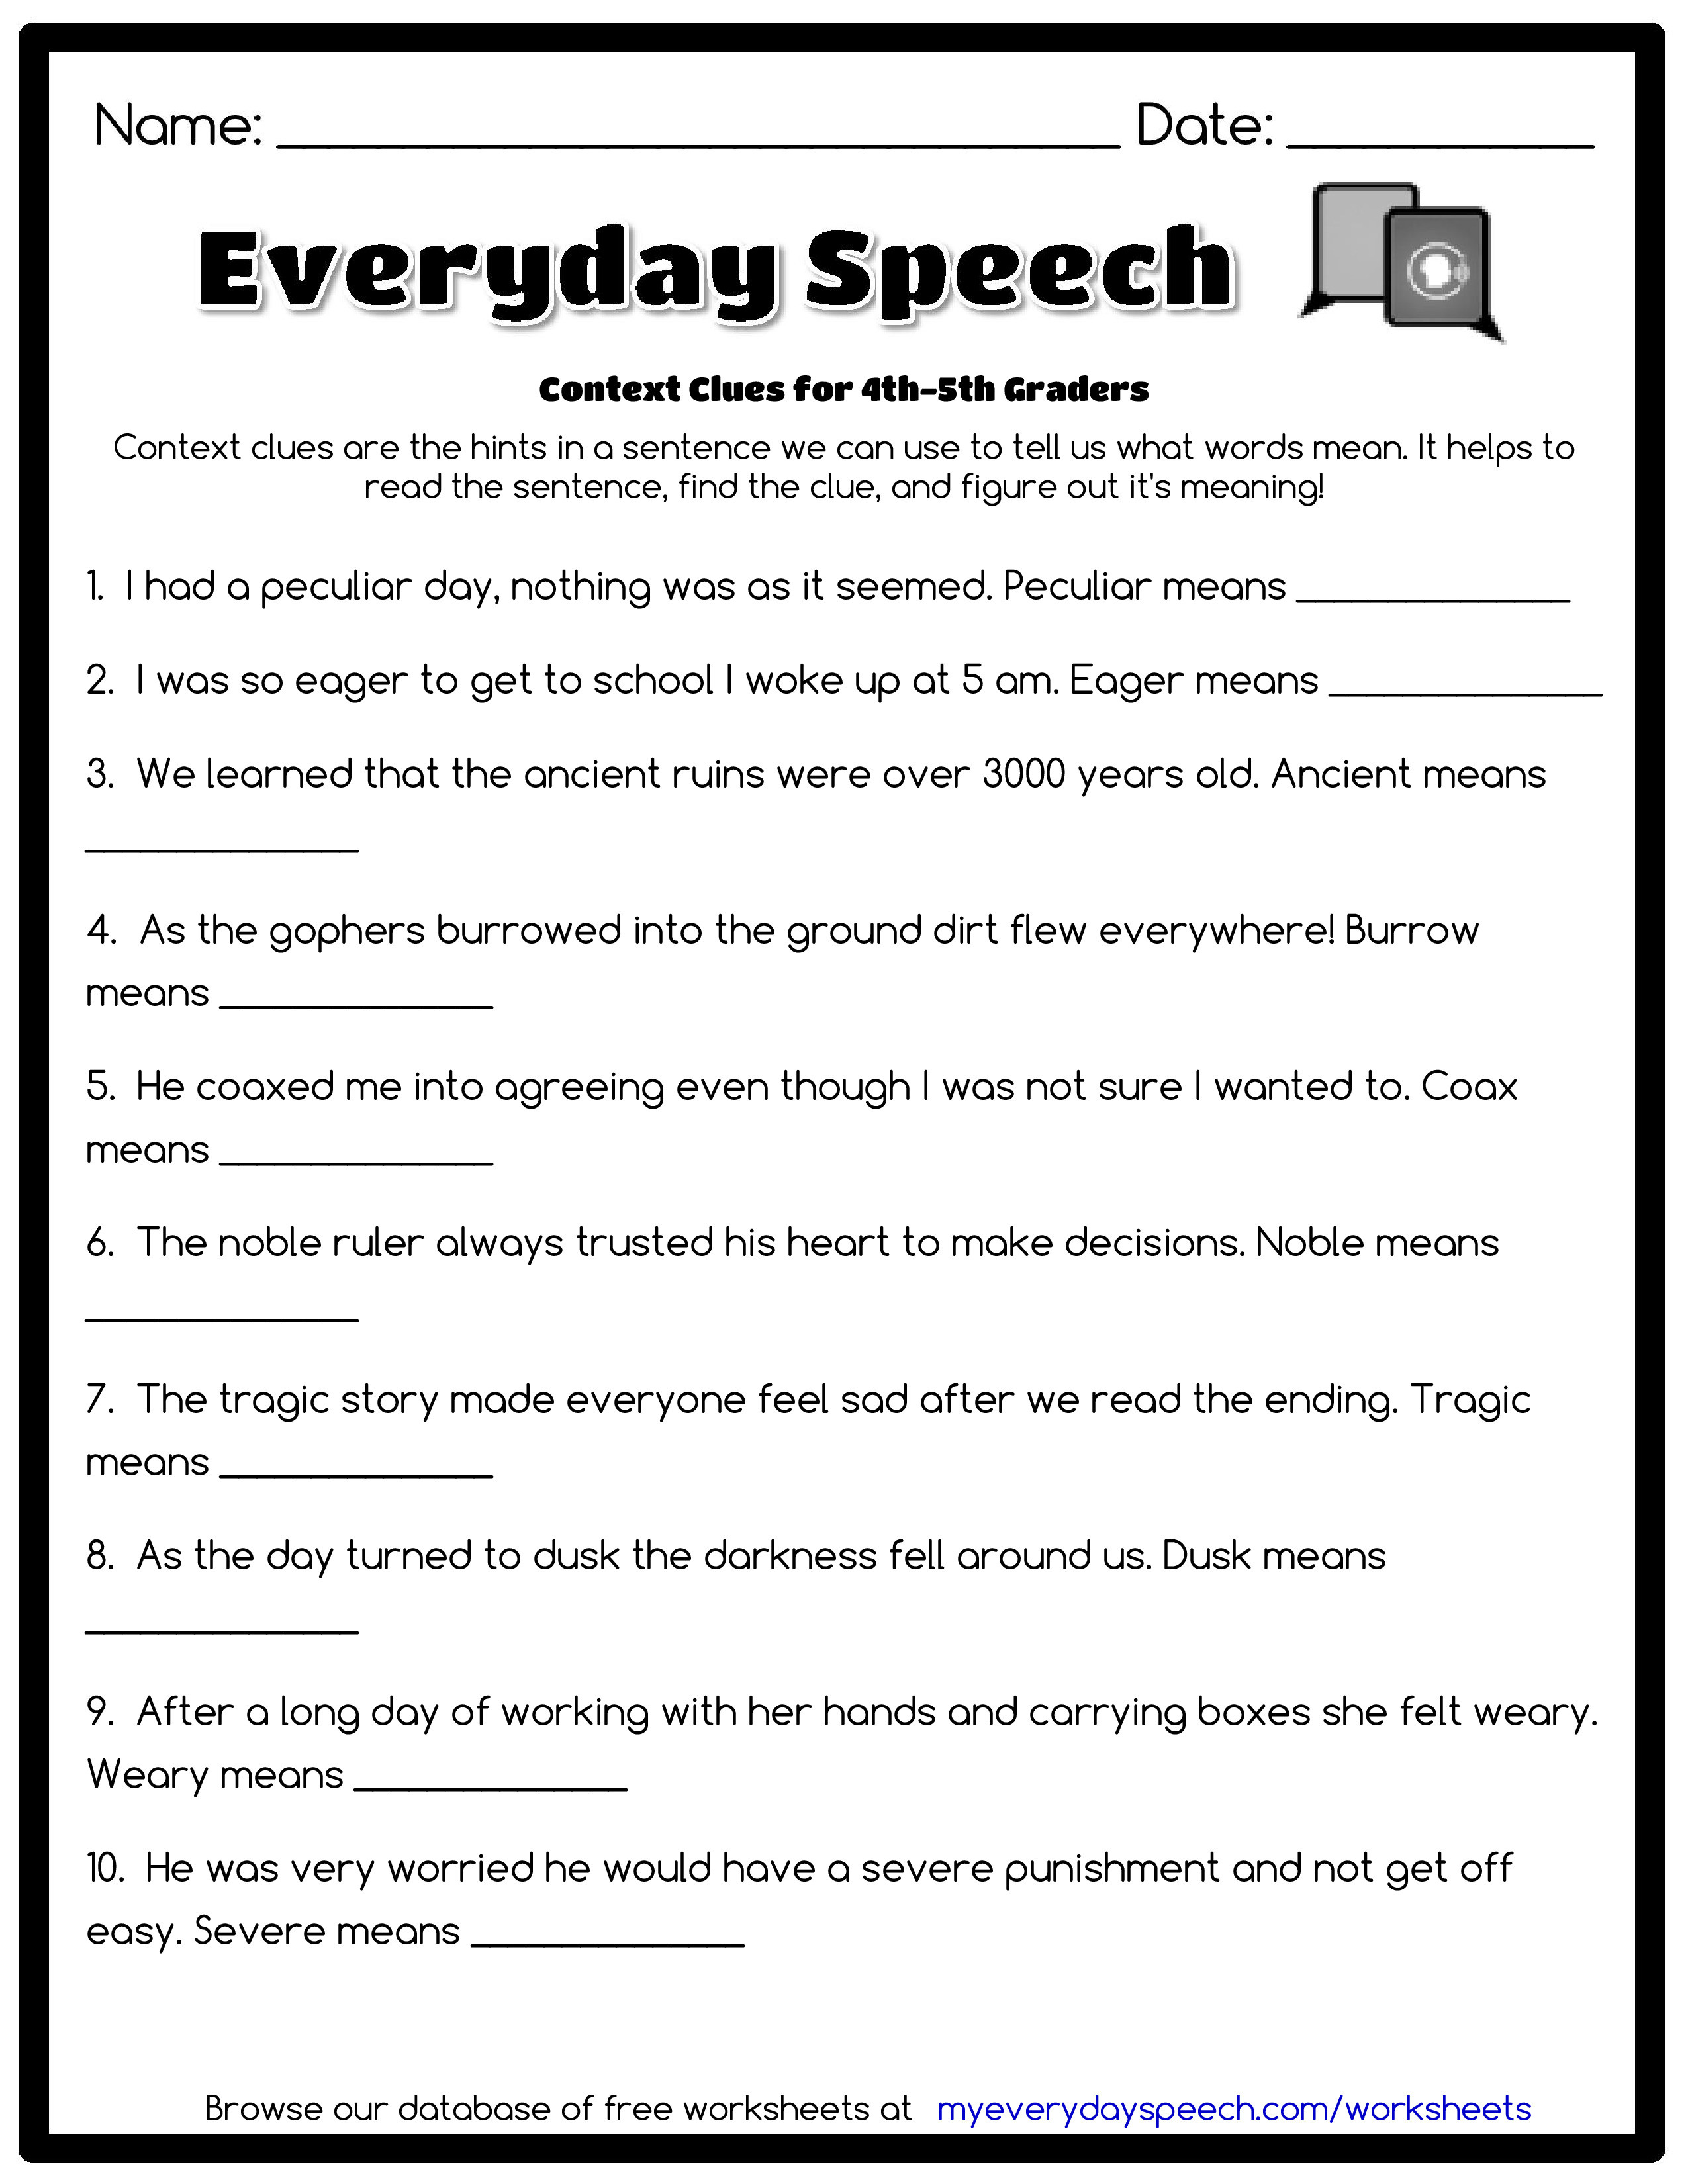 Free English Worksheets For 6th Grade